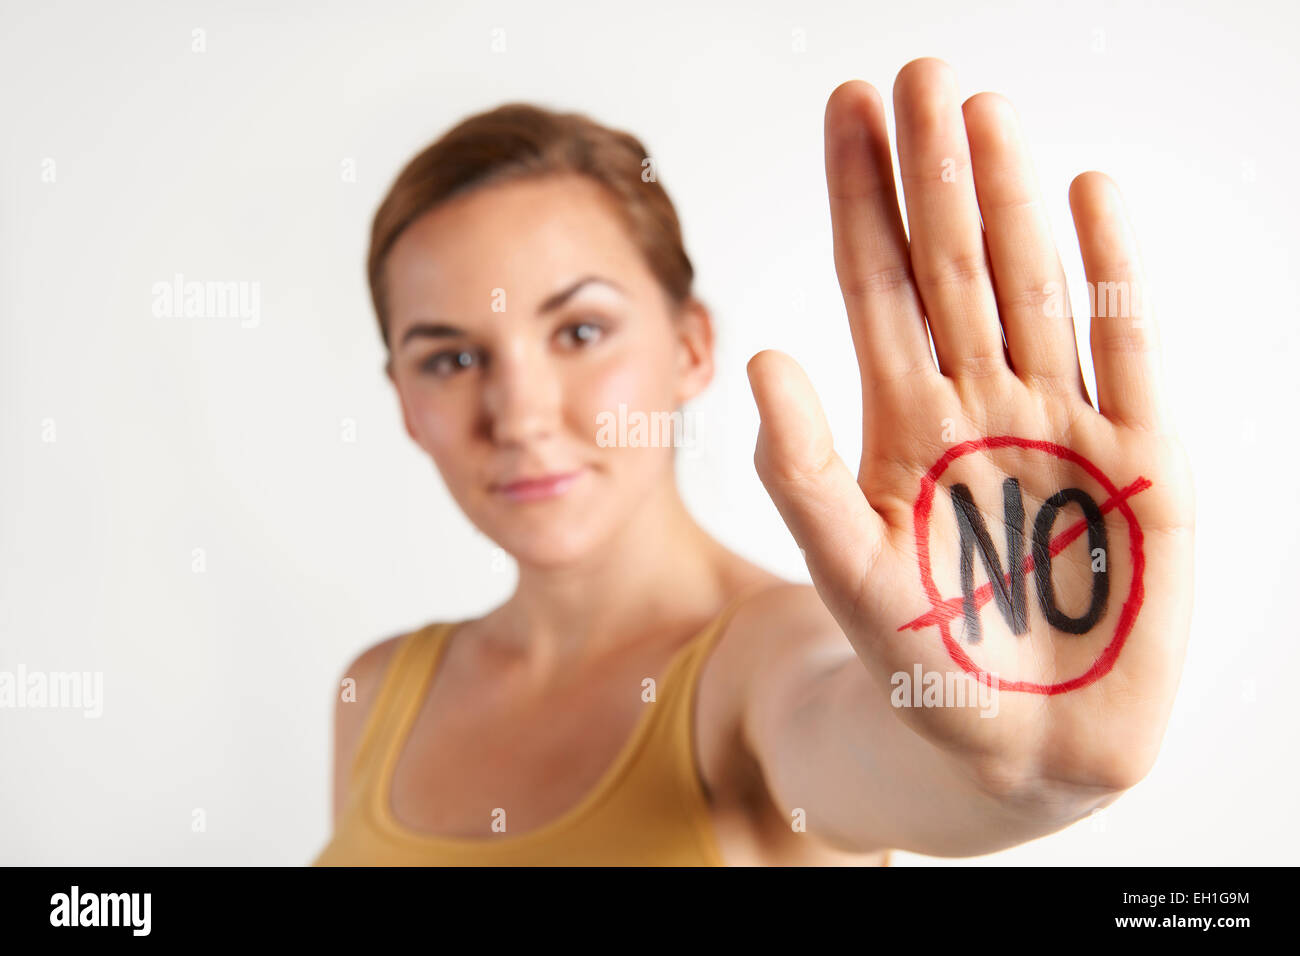 Female Protester With 'No' Written On Palm Stock Photo